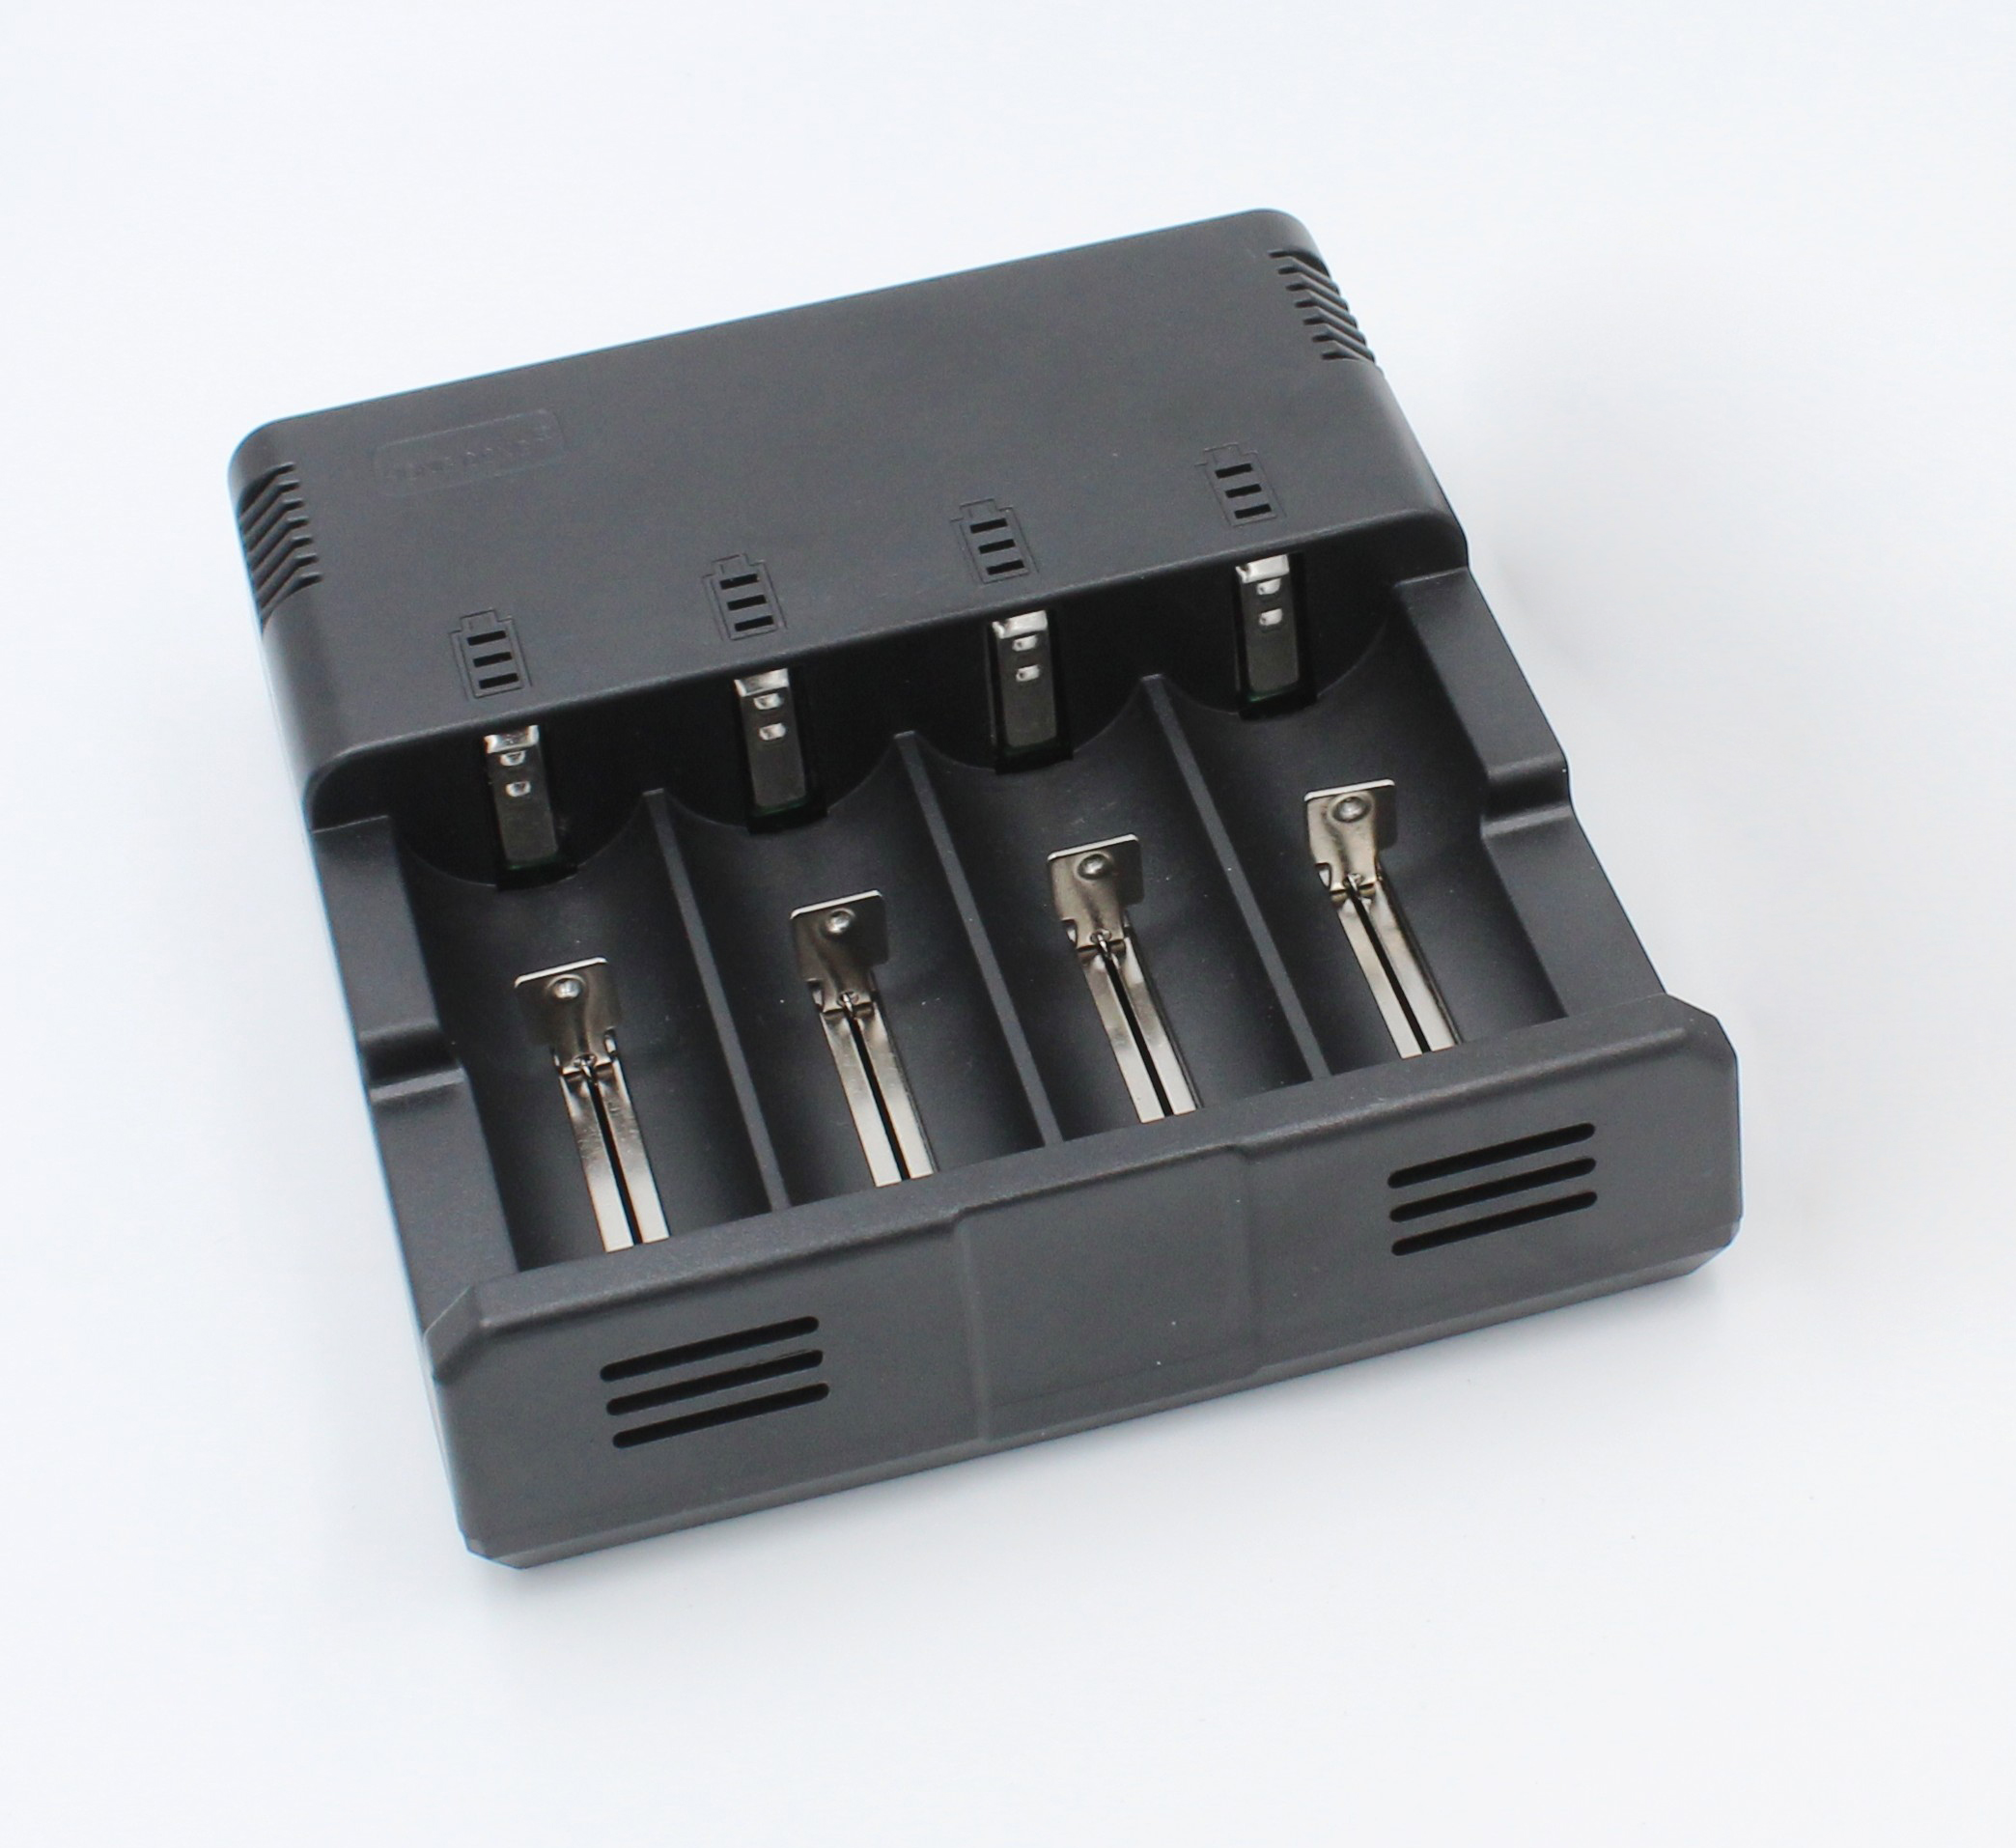 Charger for 18650 batteries with 4 slots